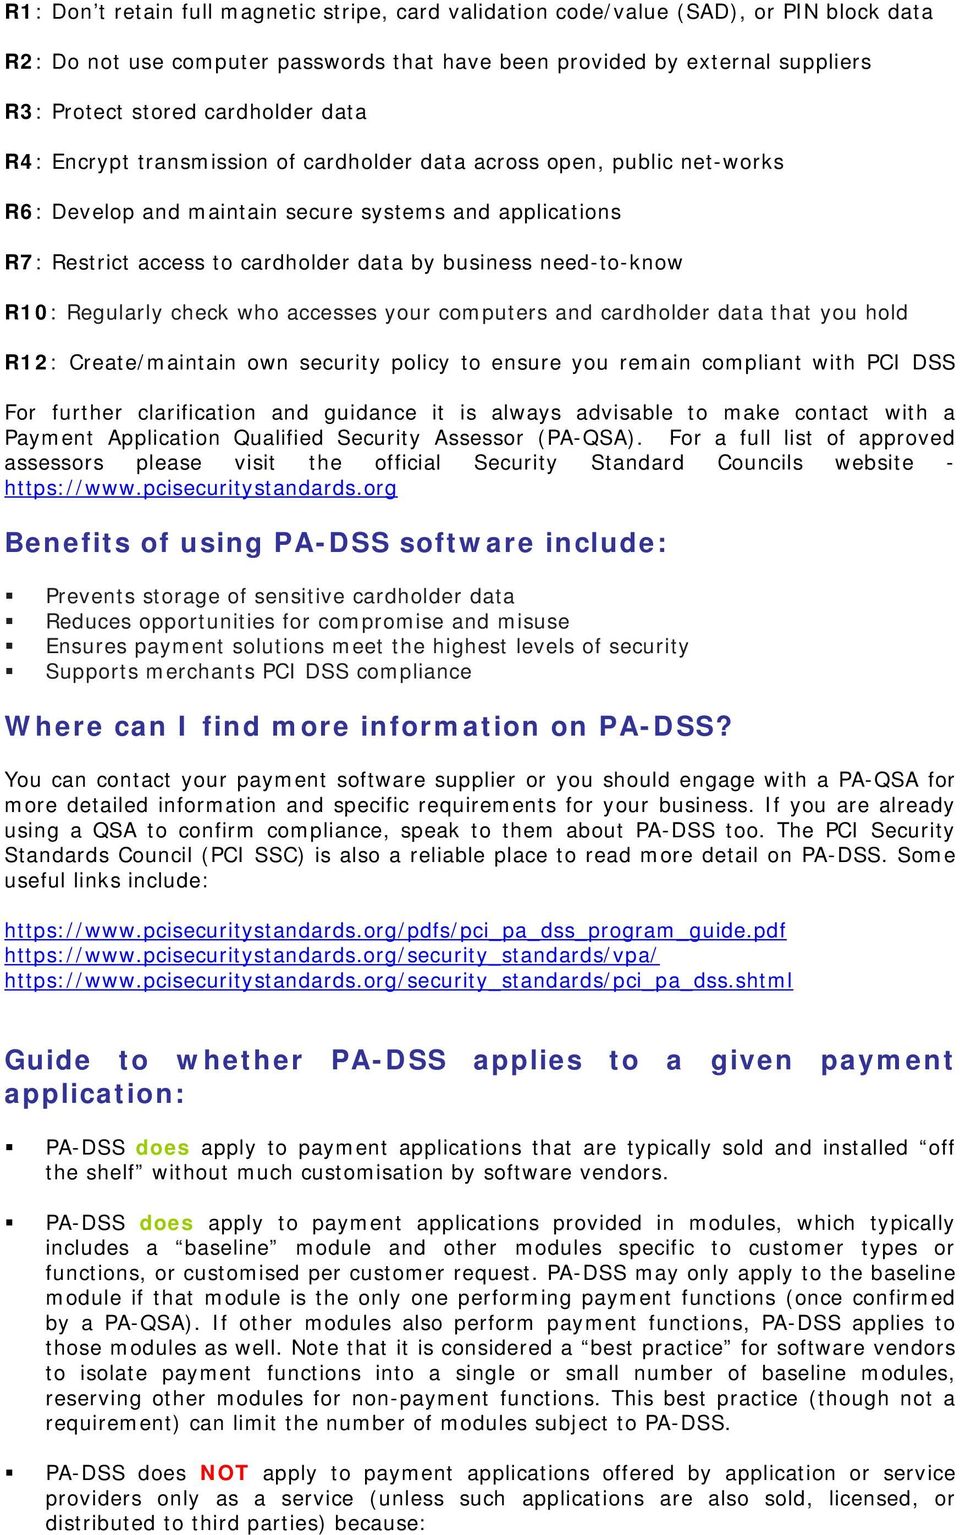 need-to-know R10: Regularly check who accesses your computers and cardholder data that you hold R12: Create/maintain own security policy to ensure you remain compliant with PCI DSS For further